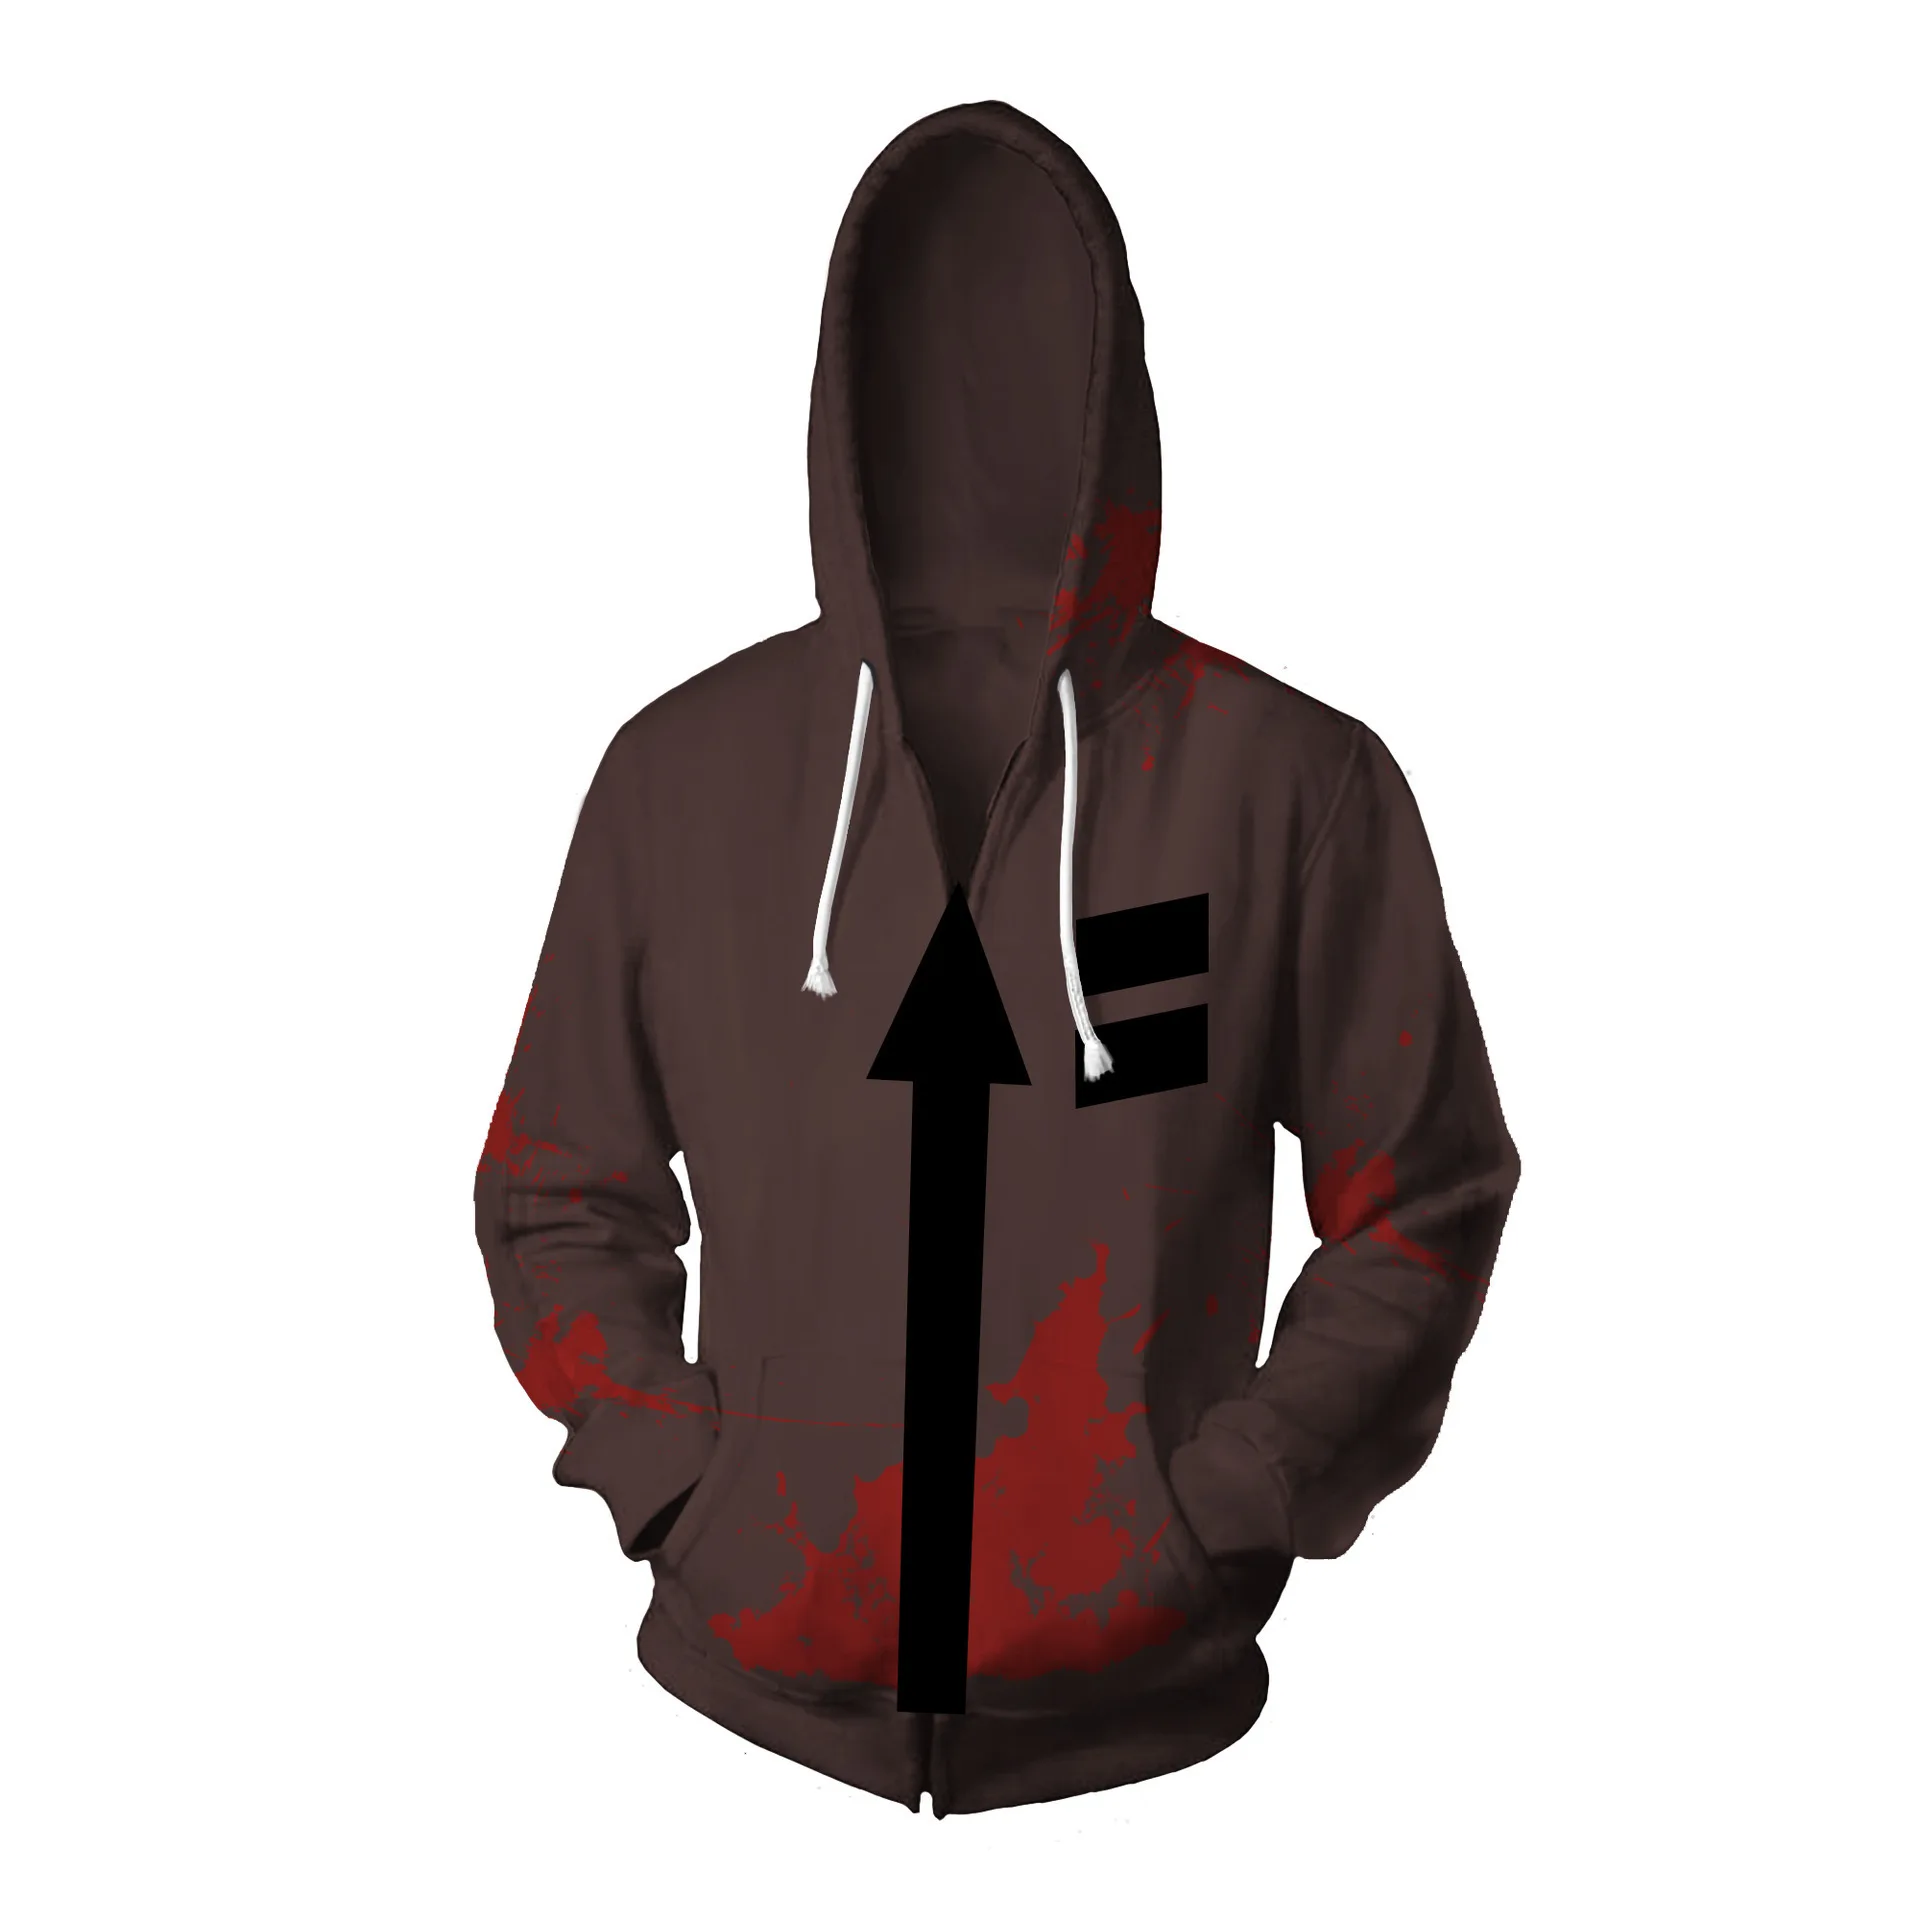 

Cosplay Anime Angels of Death Costume Hoodie Isaac Foster Zack Cosplay Sweatshirts Fashion 3D Printing Jacket Hooded Coat Tops